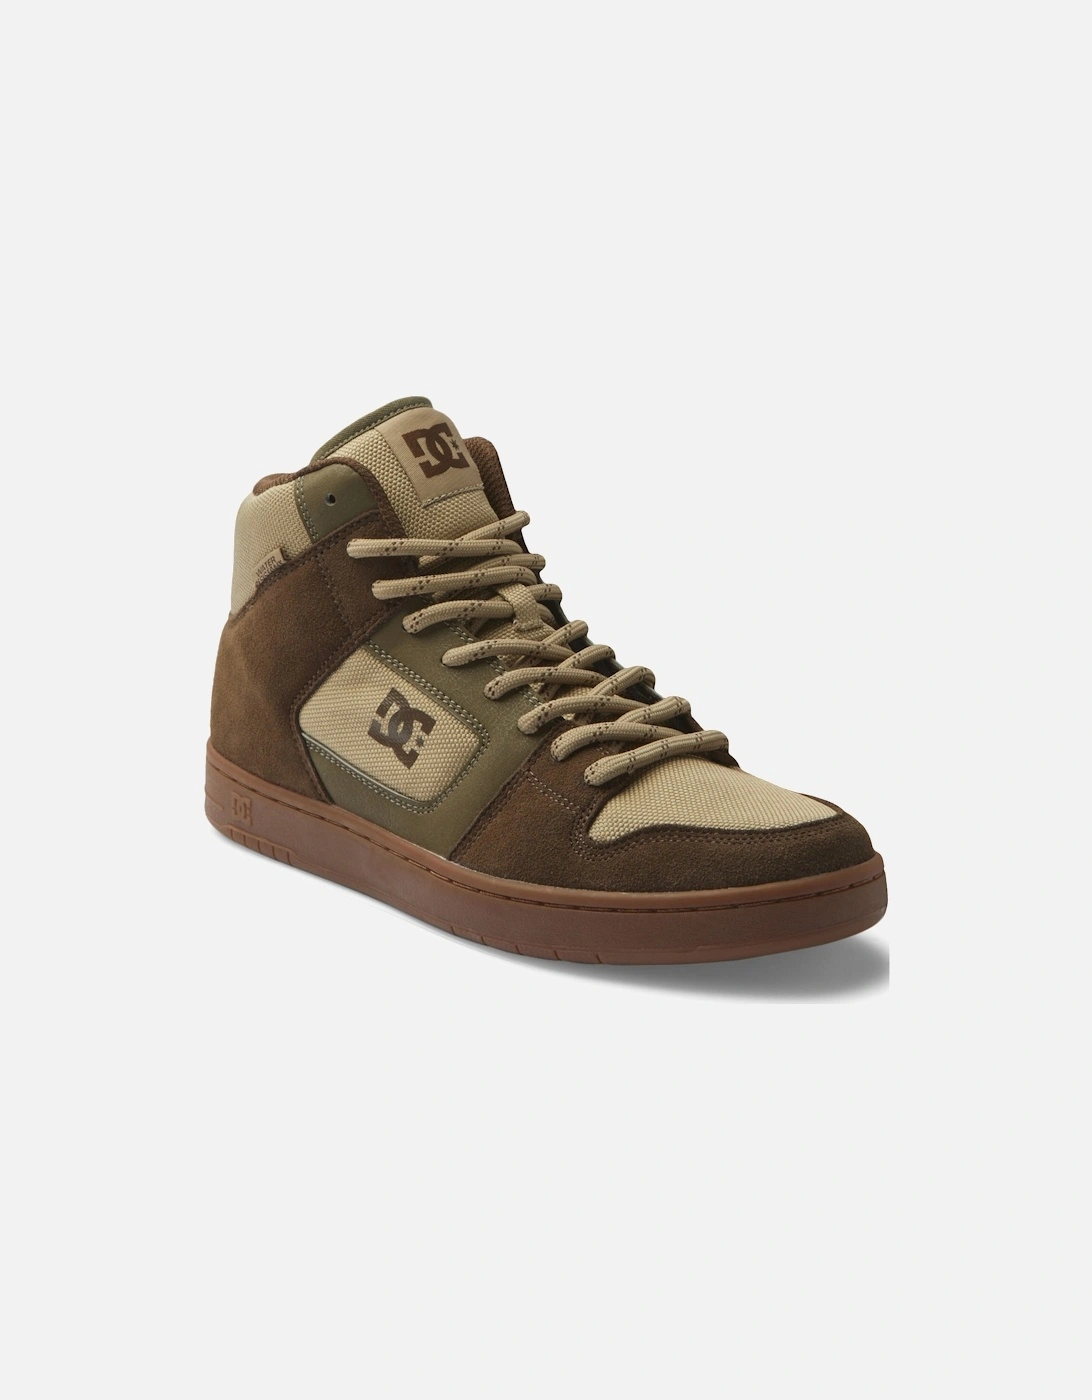 Mens Manteca 4 High Top Suede Leather Trainers - Dark Choc, 9 of 8